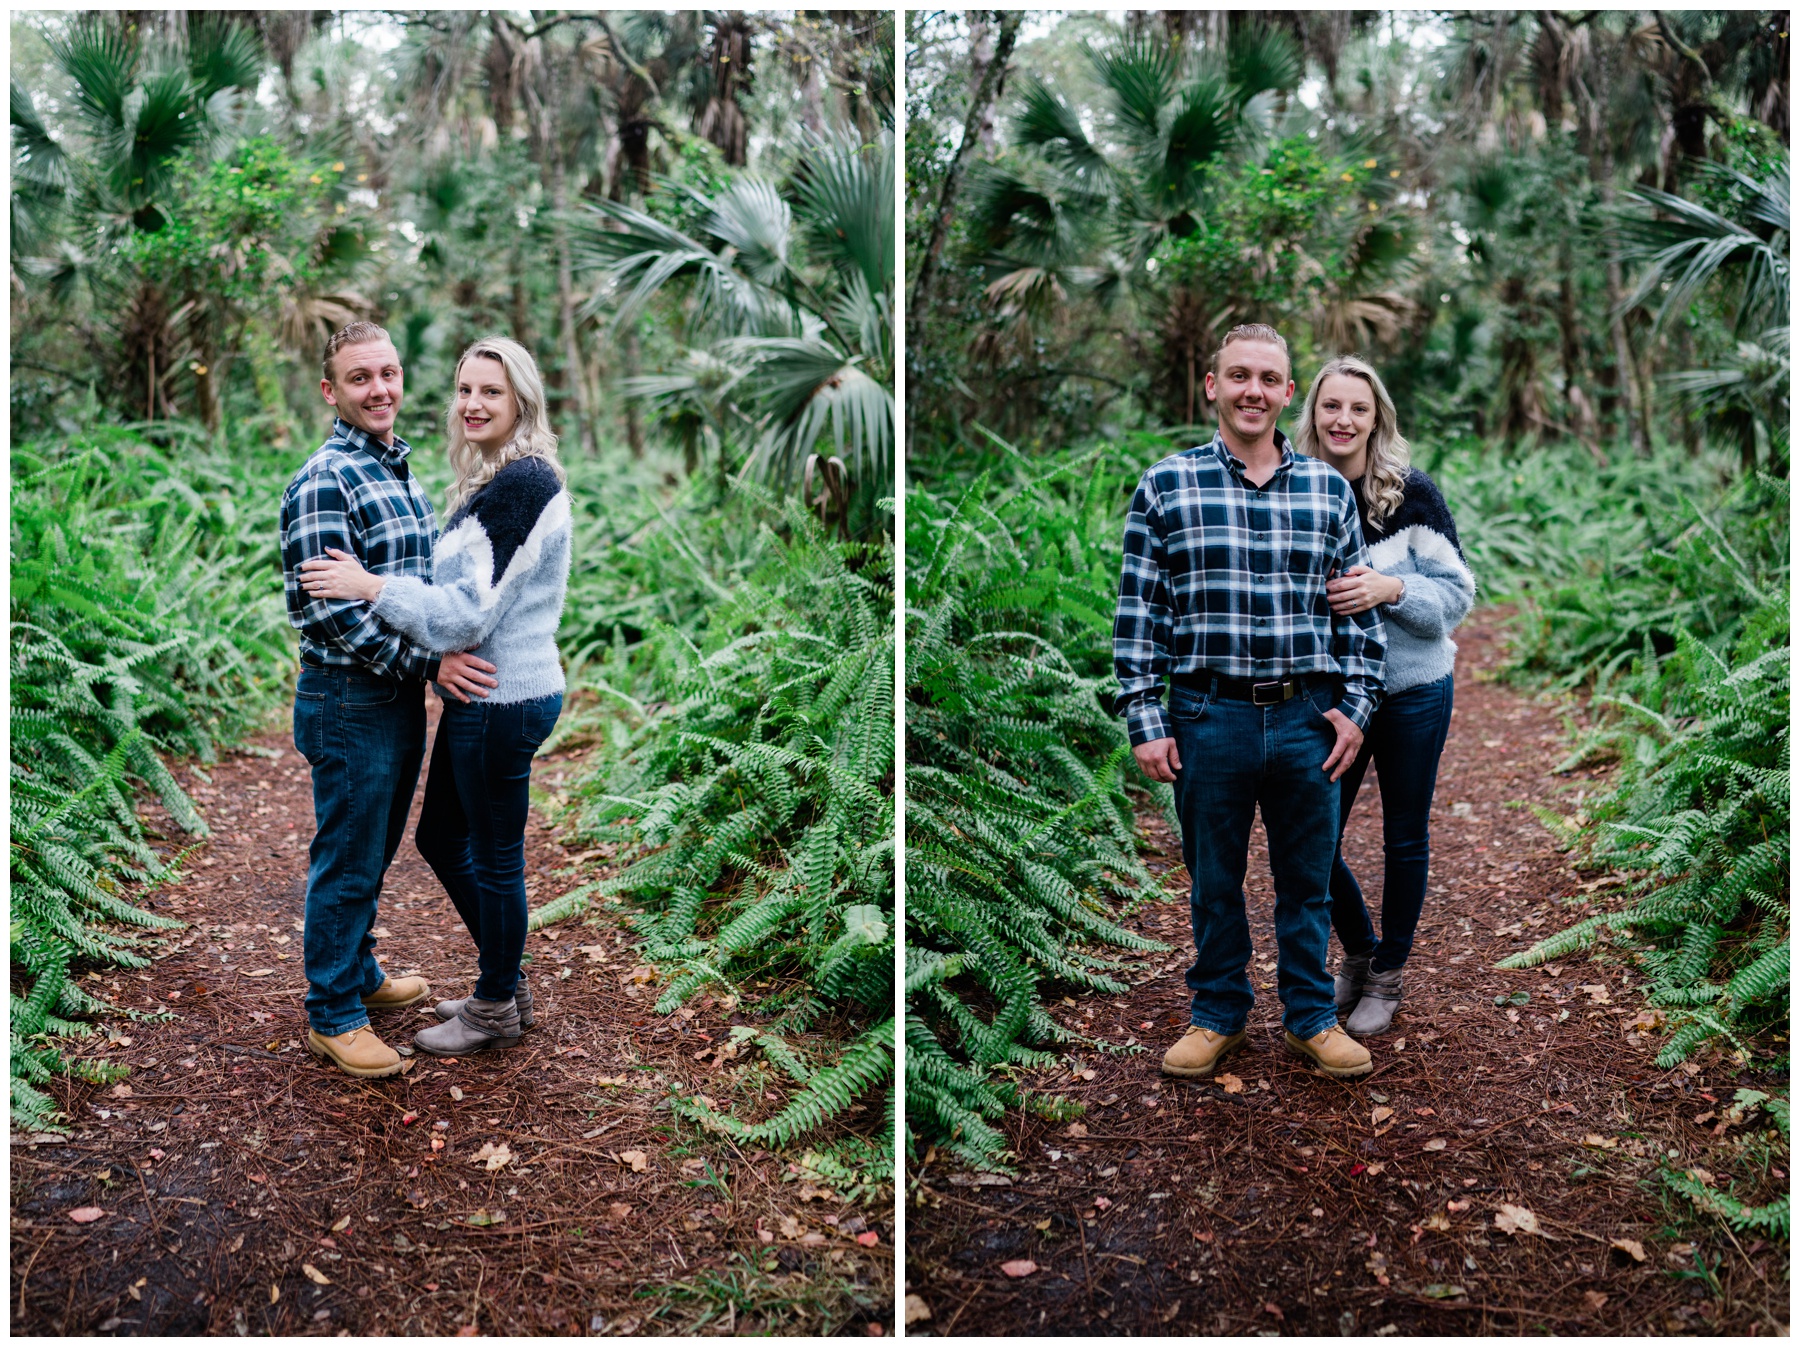 Couple embraces in swamp setting during Caloosahatchee River photo shoot.